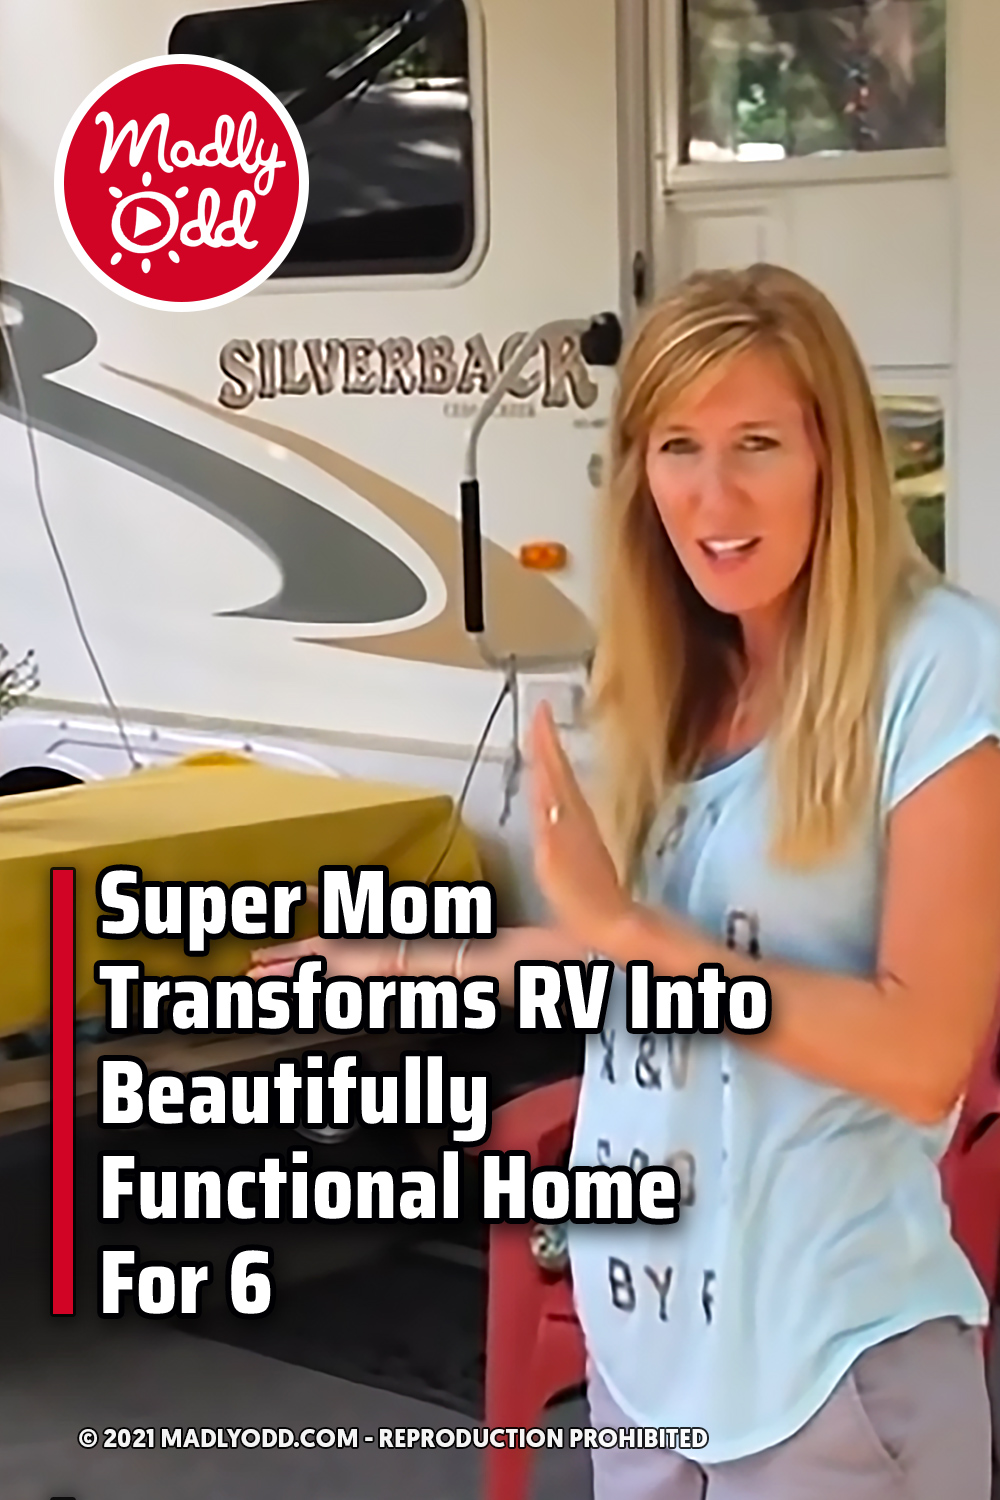 Super Mom Transforms RV Into Beautifully Functional Home For 6